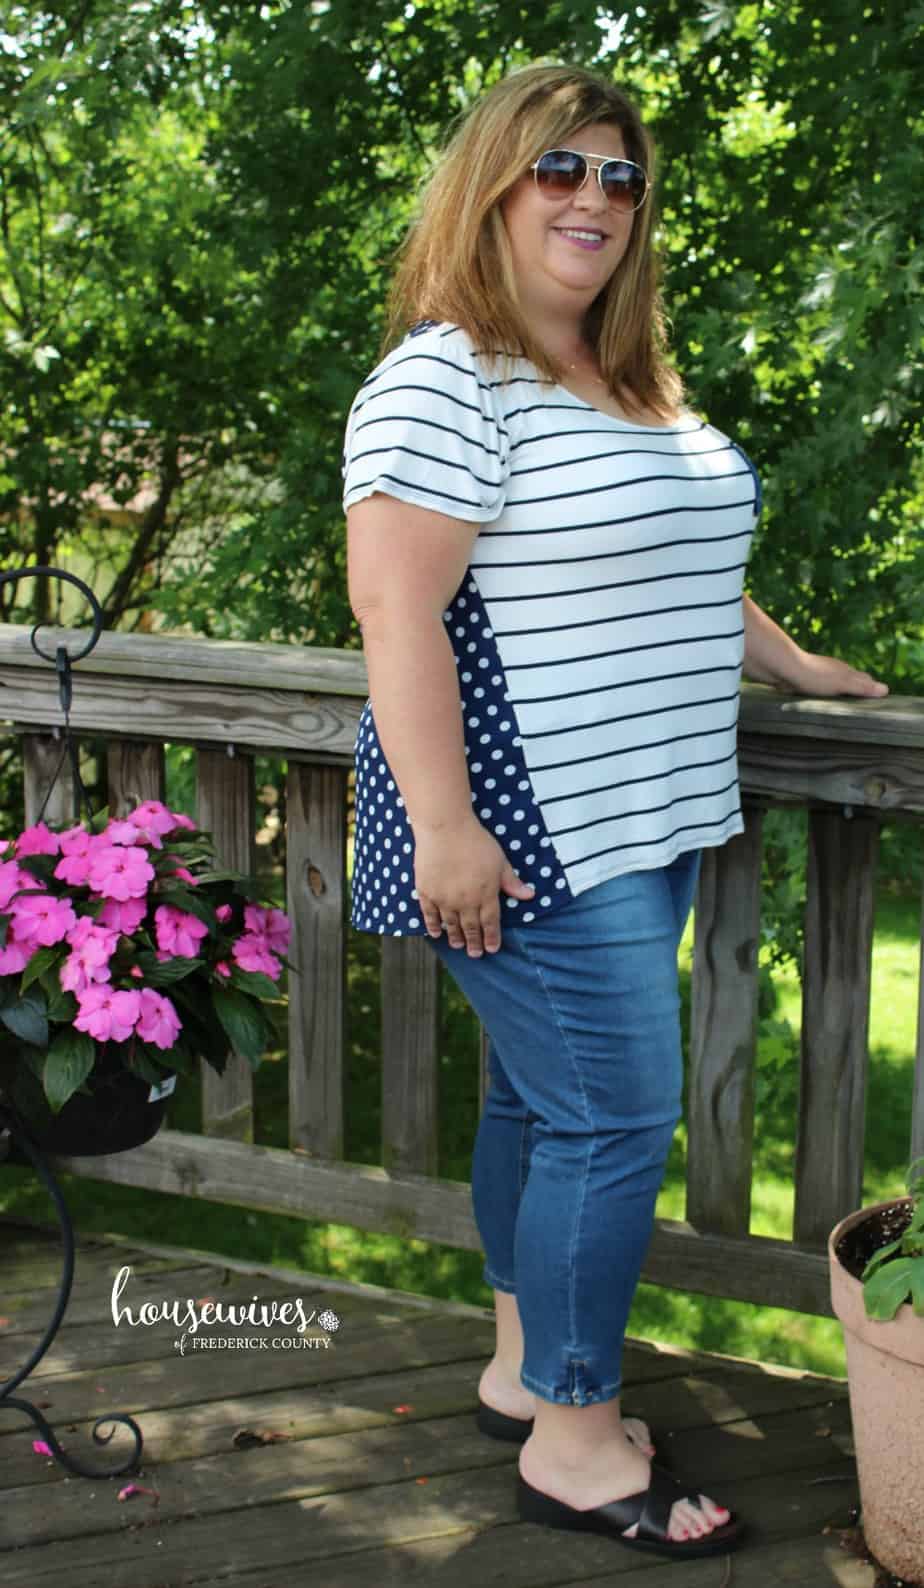 The Best Plus Size Clothing is Finally Here!